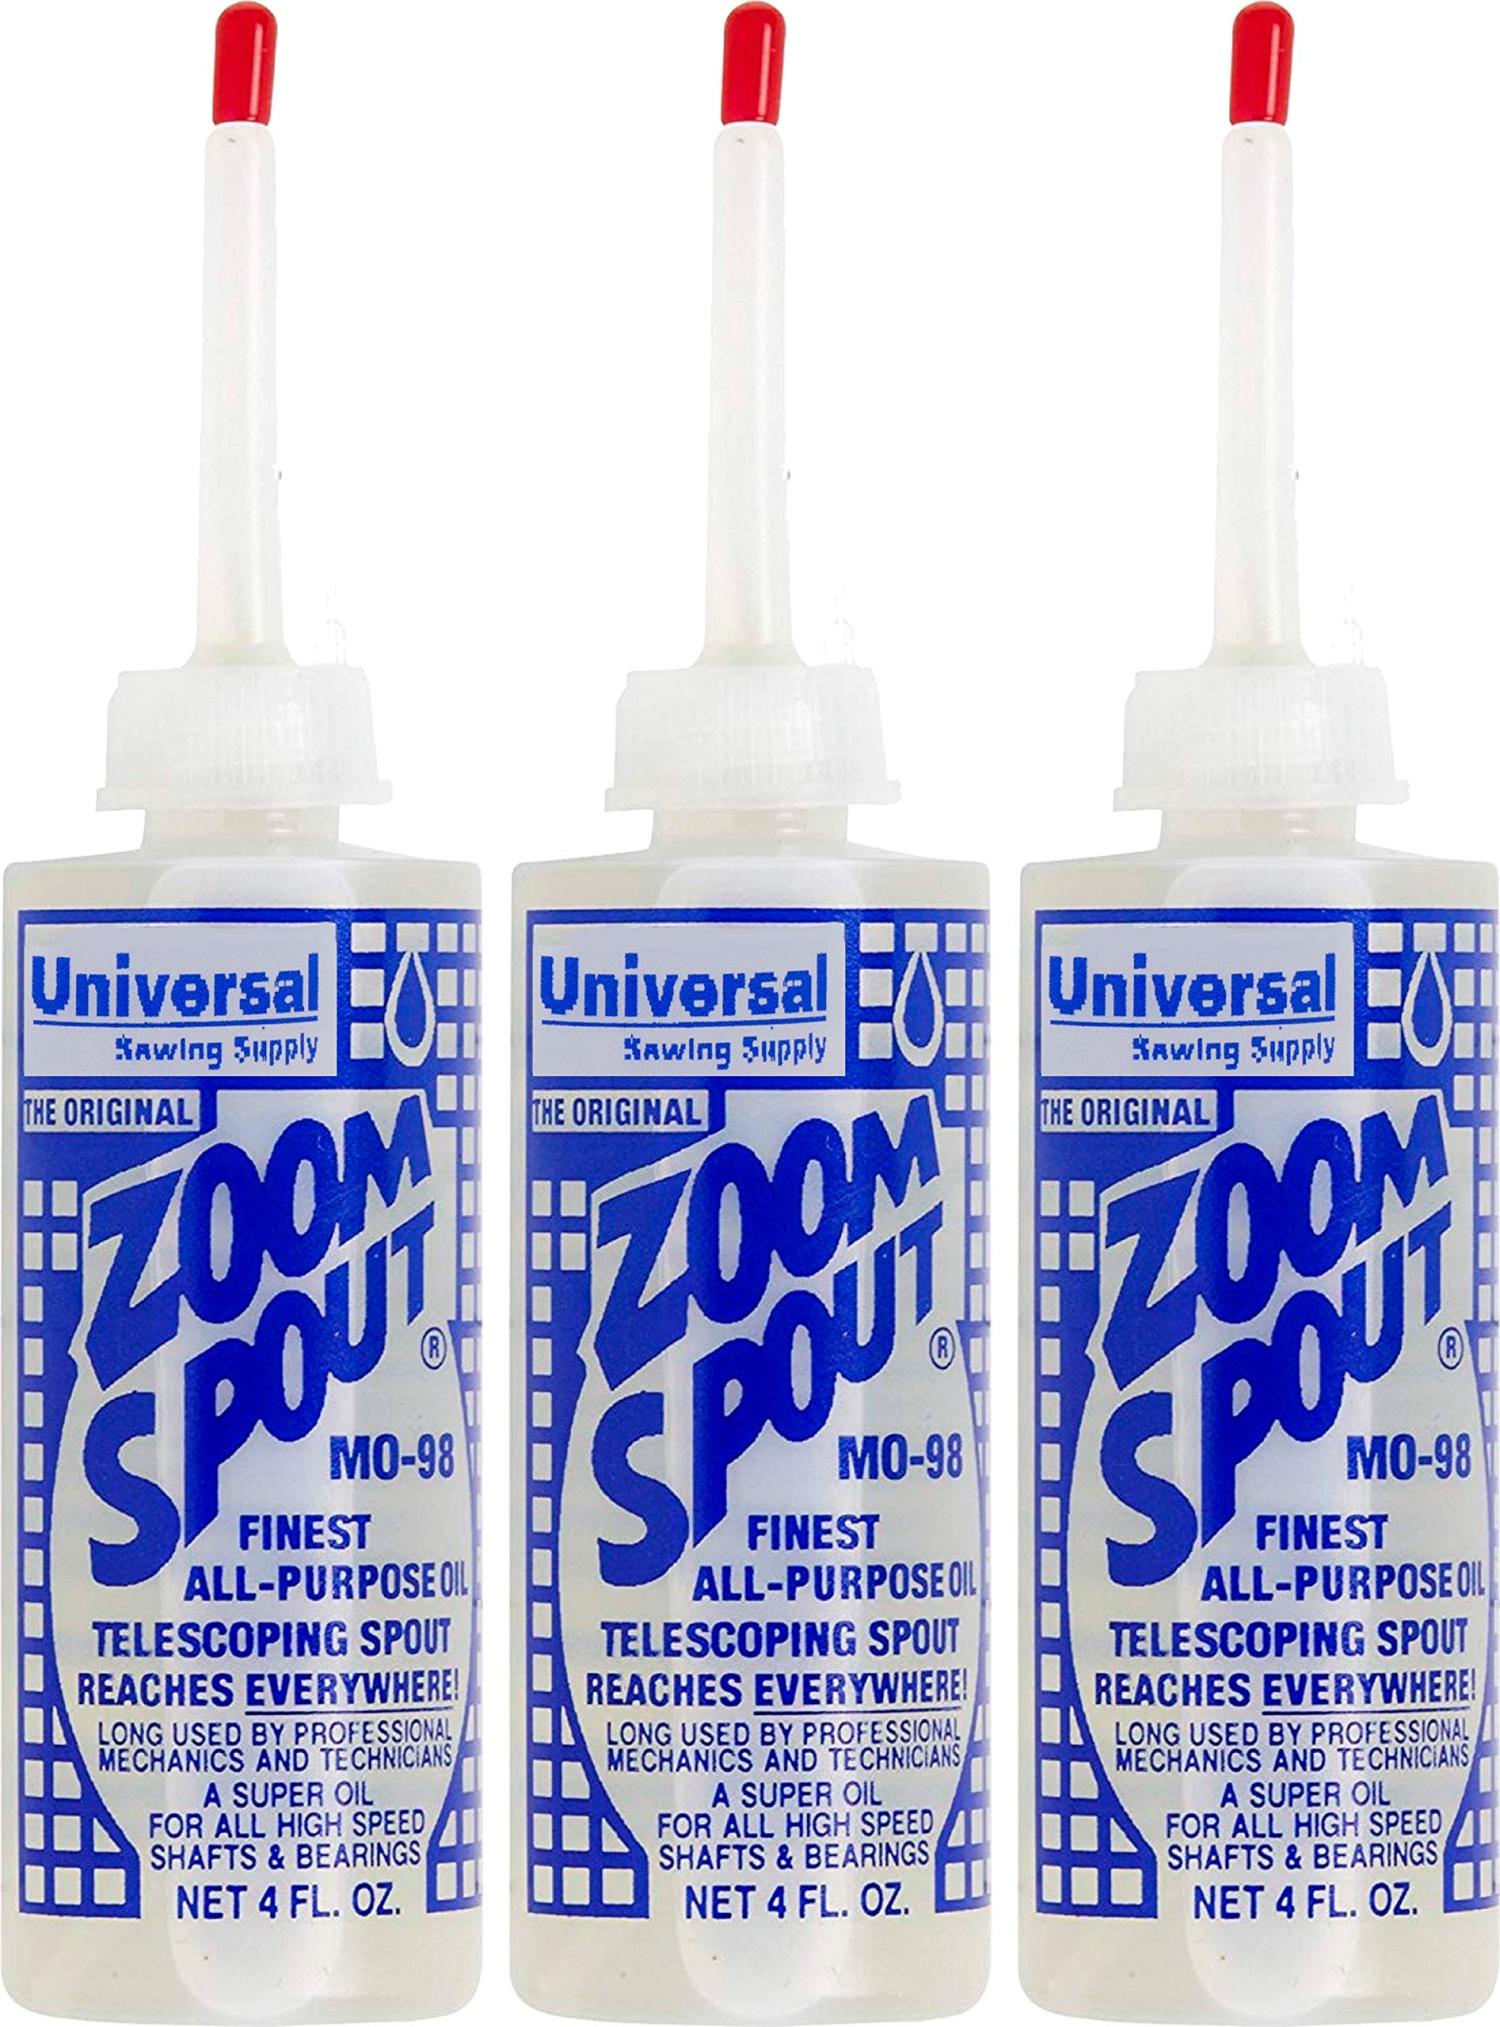 Universal Sewing Machine Oil in Zoom Spout Oiler Lily White Oil (Stainless)  for Sewing Machines, Textile